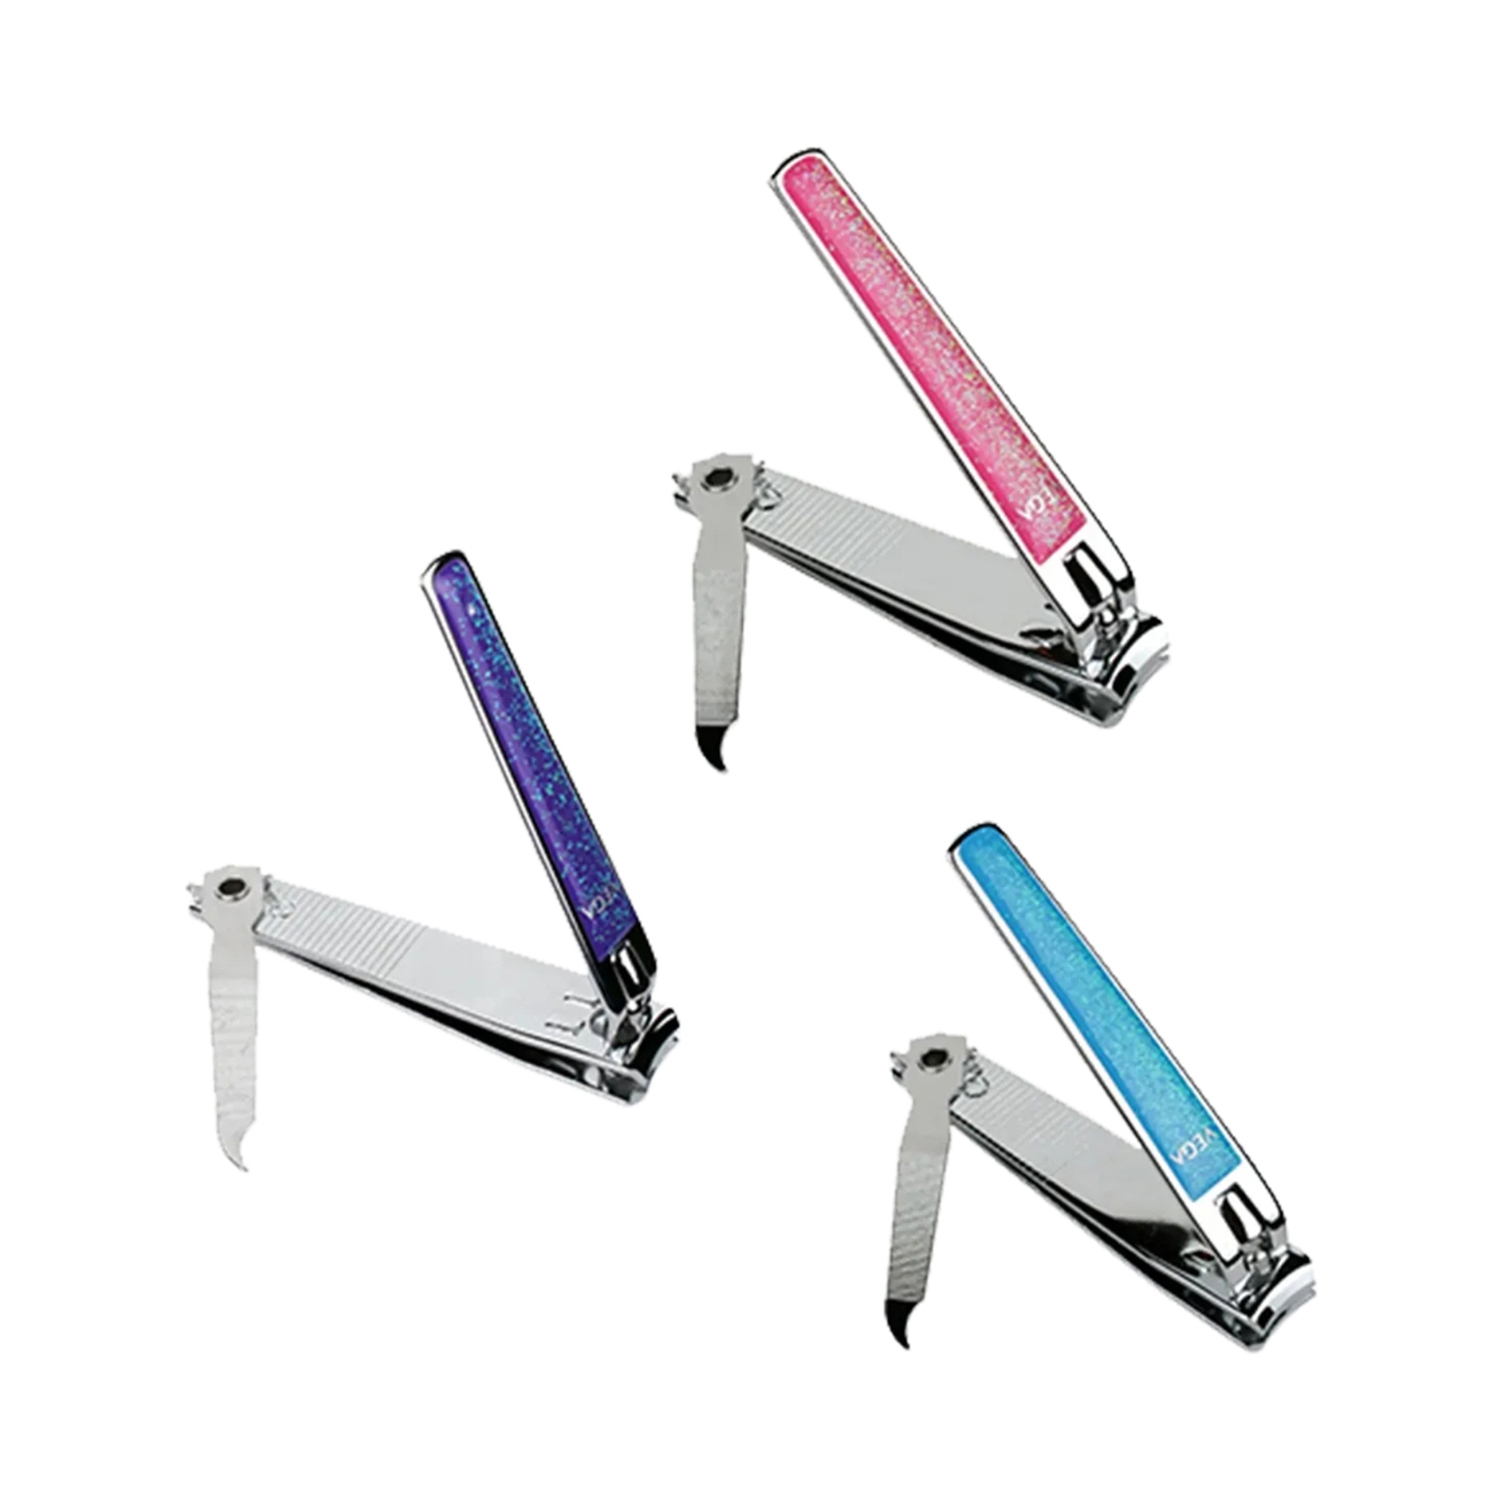 Amazon.com : G.S PODIATRY TOE NAIL CLIPPERS FOR THICK NAILS PROFESSIONAL  CHIROPODY FOOTCARE LAB : Beauty & Personal Care